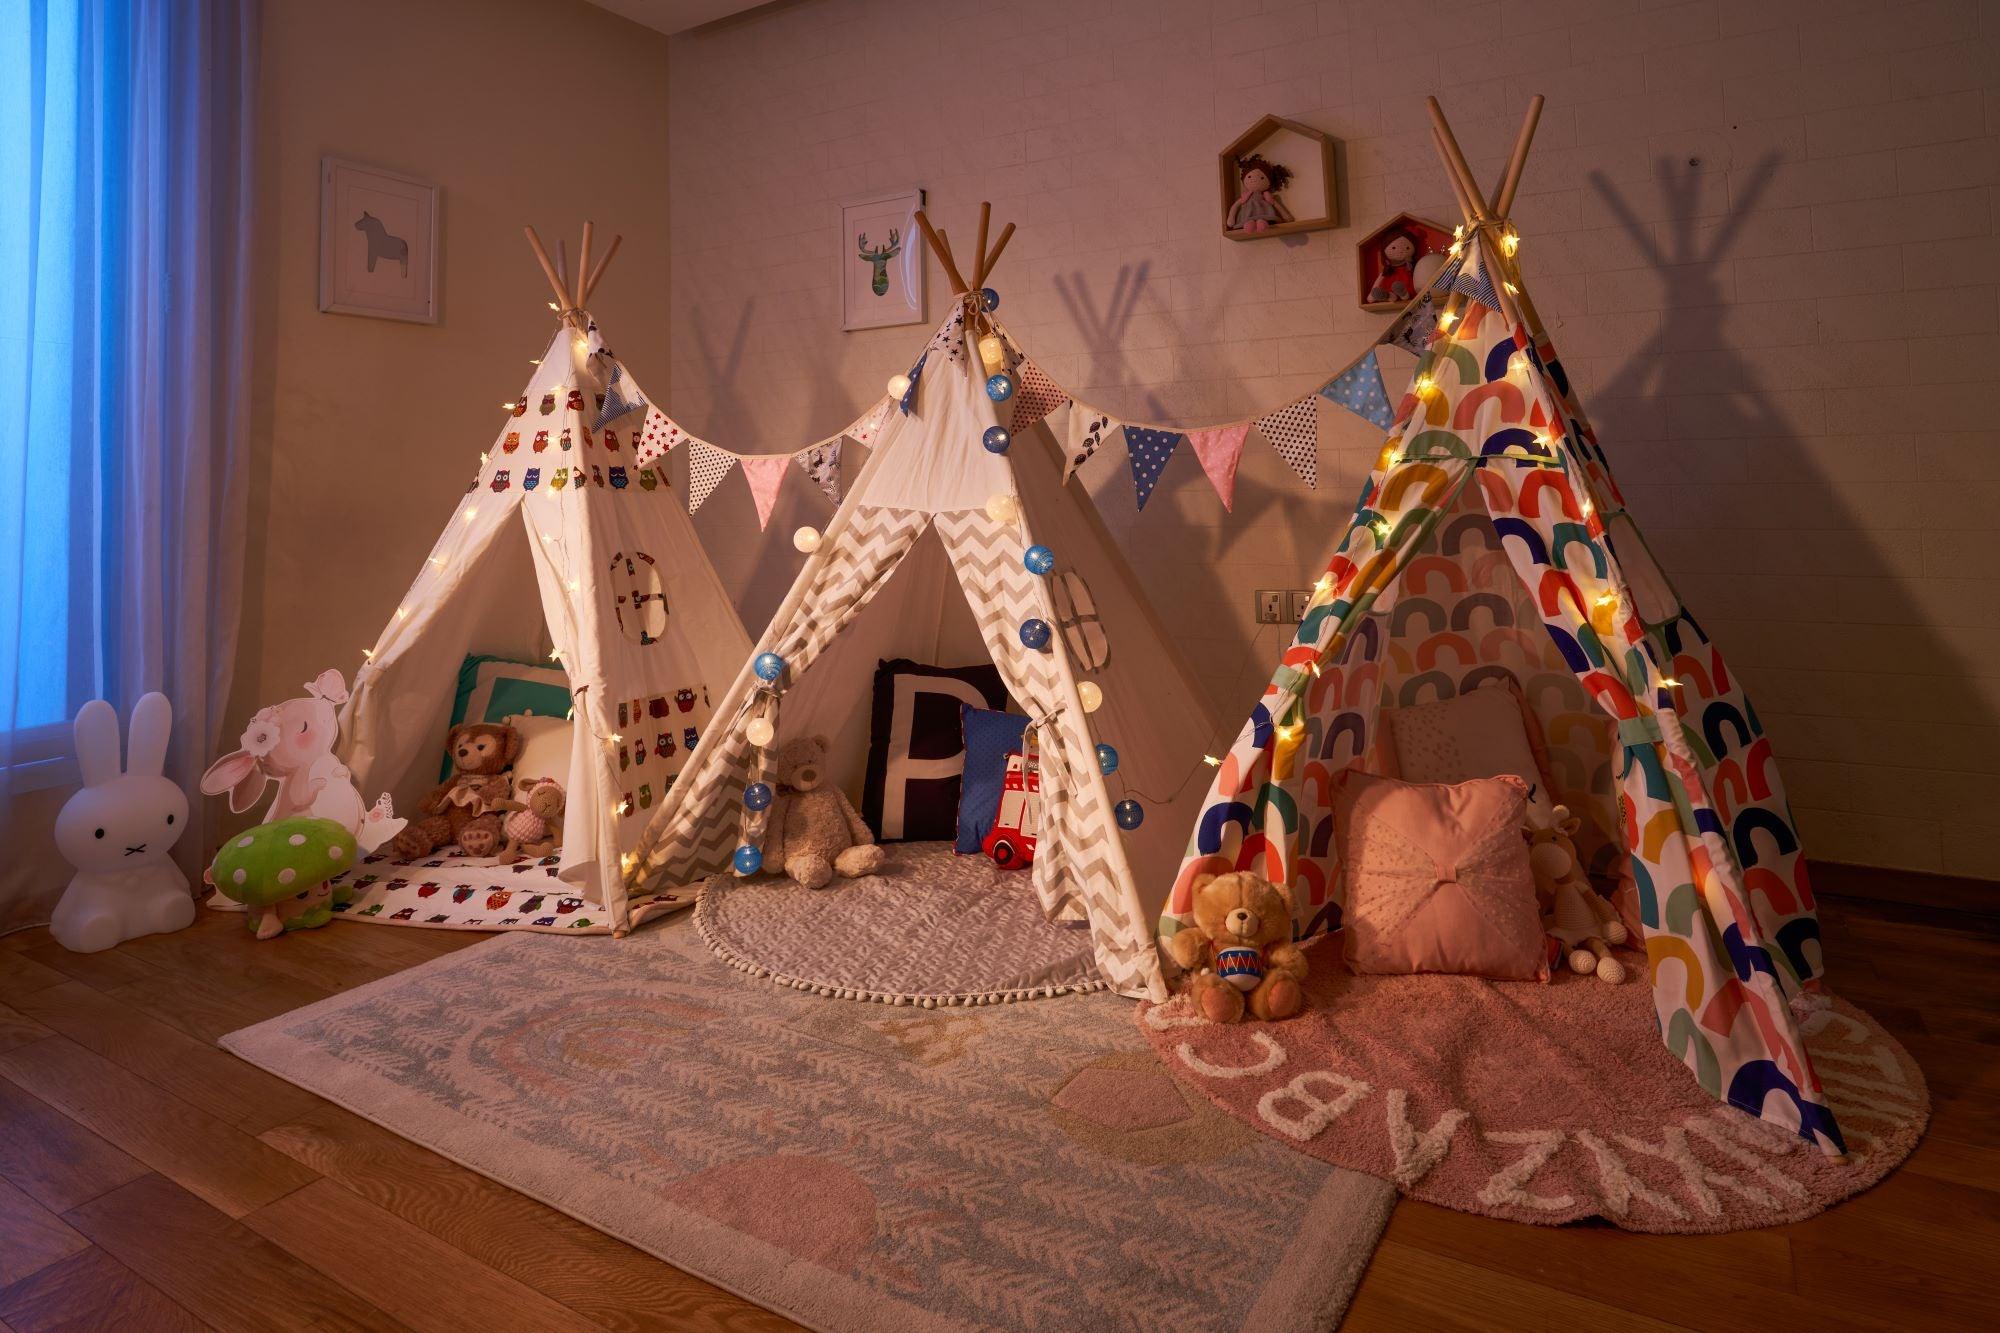 PETIT Rainbow Teepee with lights (mat sold separately) - Kids Haven